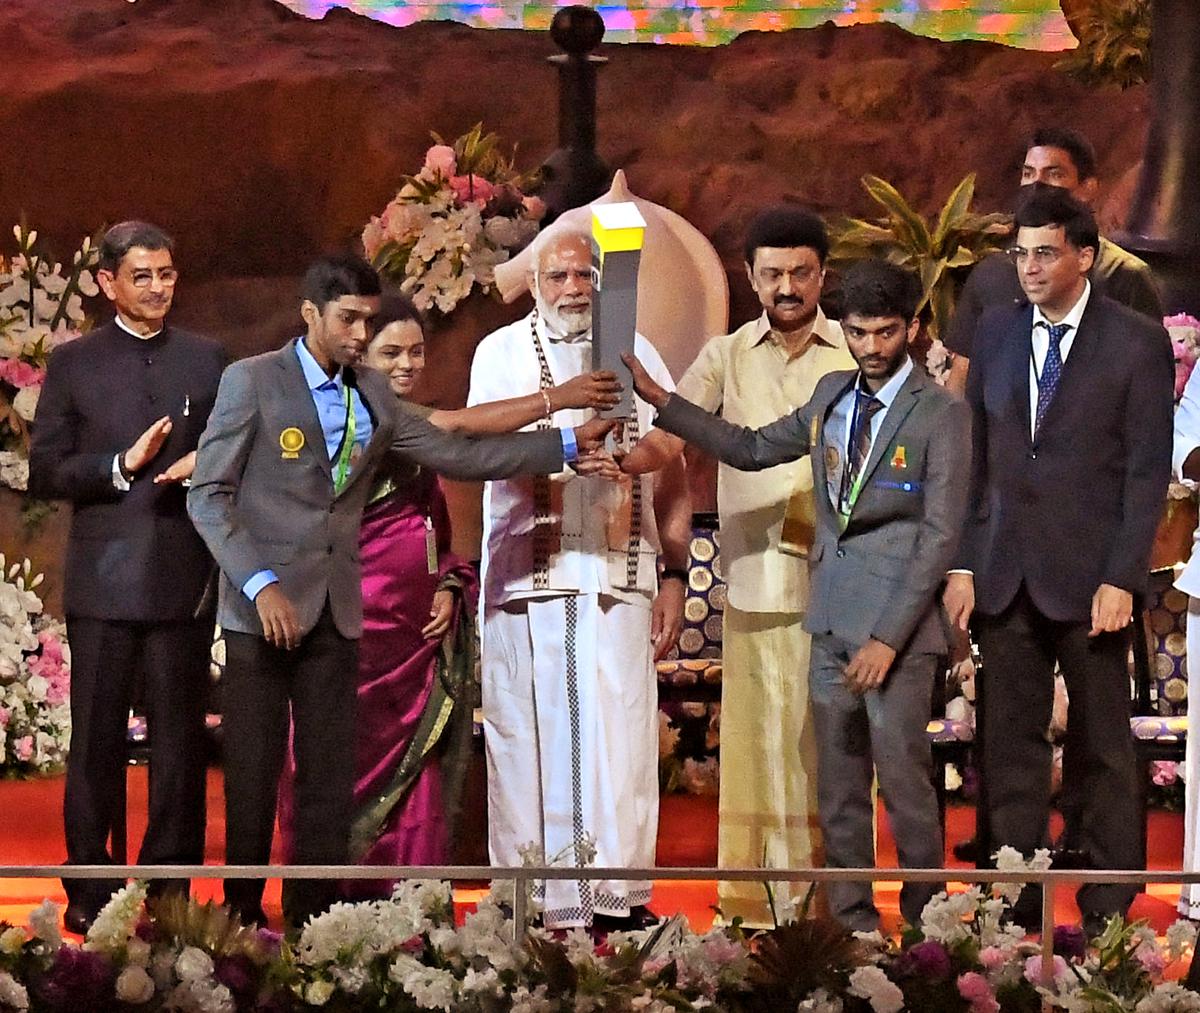 Prime Minister Narendra Modi at the 44th FIDE Chess Olympiad seen holding the Chess Olympiad Torch along with Tamil Nadu CM MK Stalin, and former Grand Master Vishwanathan Anand.  Also in the frame are R. Praggnanandhaa, S. Vijayalakshmi, D Gukesh - all Grand Masters at the opening ceremony of the Chess Olympiad held in Nehru Indoor Stadium, Chennai on July 28, 2022. 